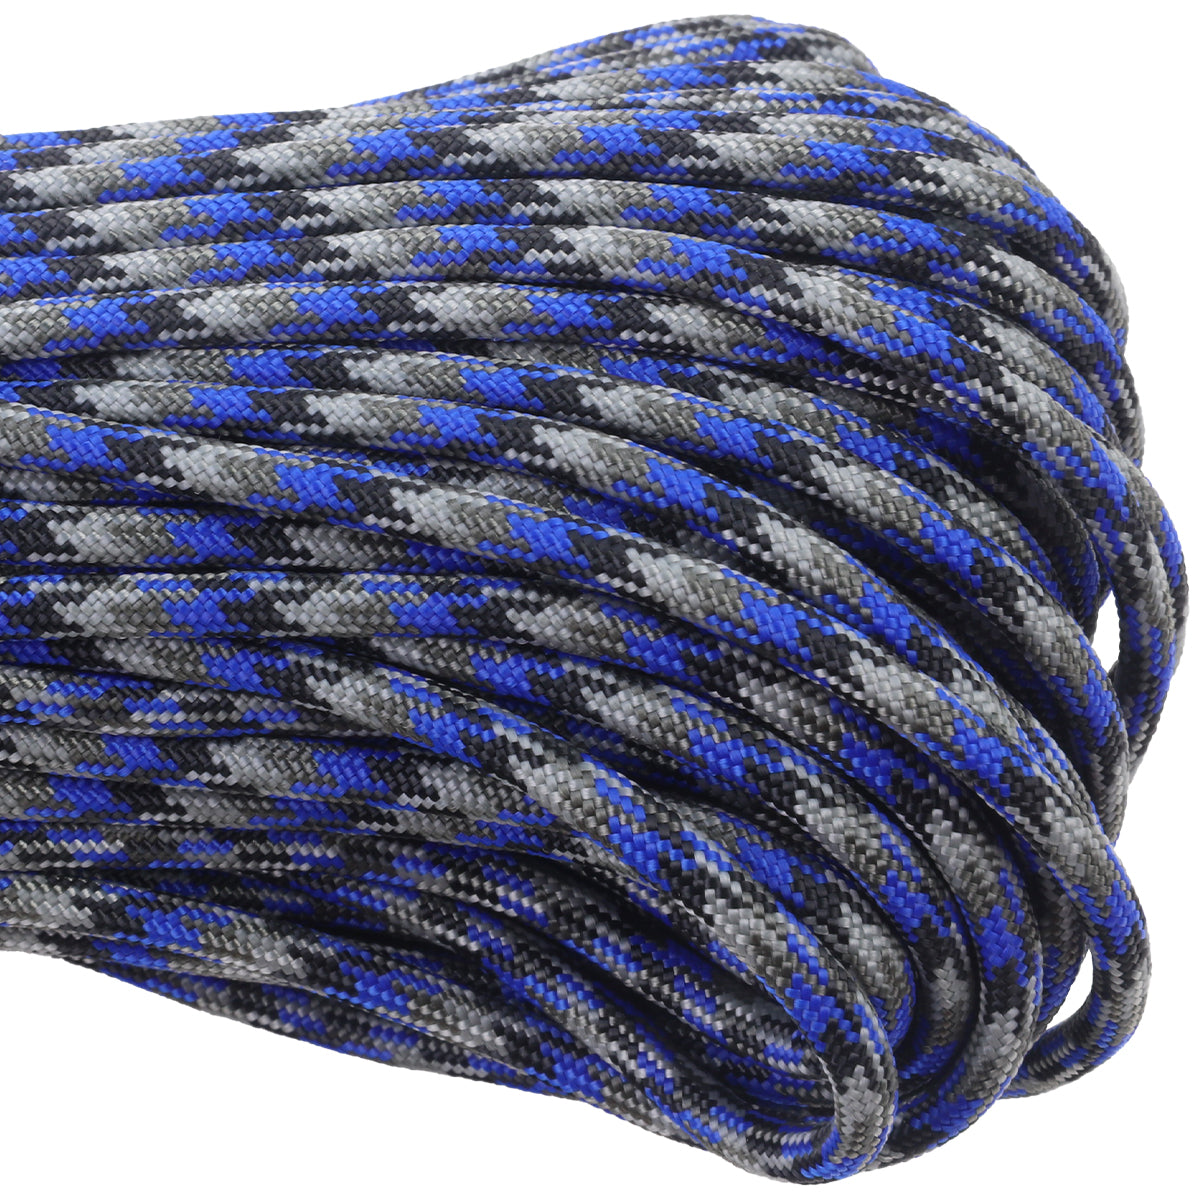 550 Paracord - Blue Steel